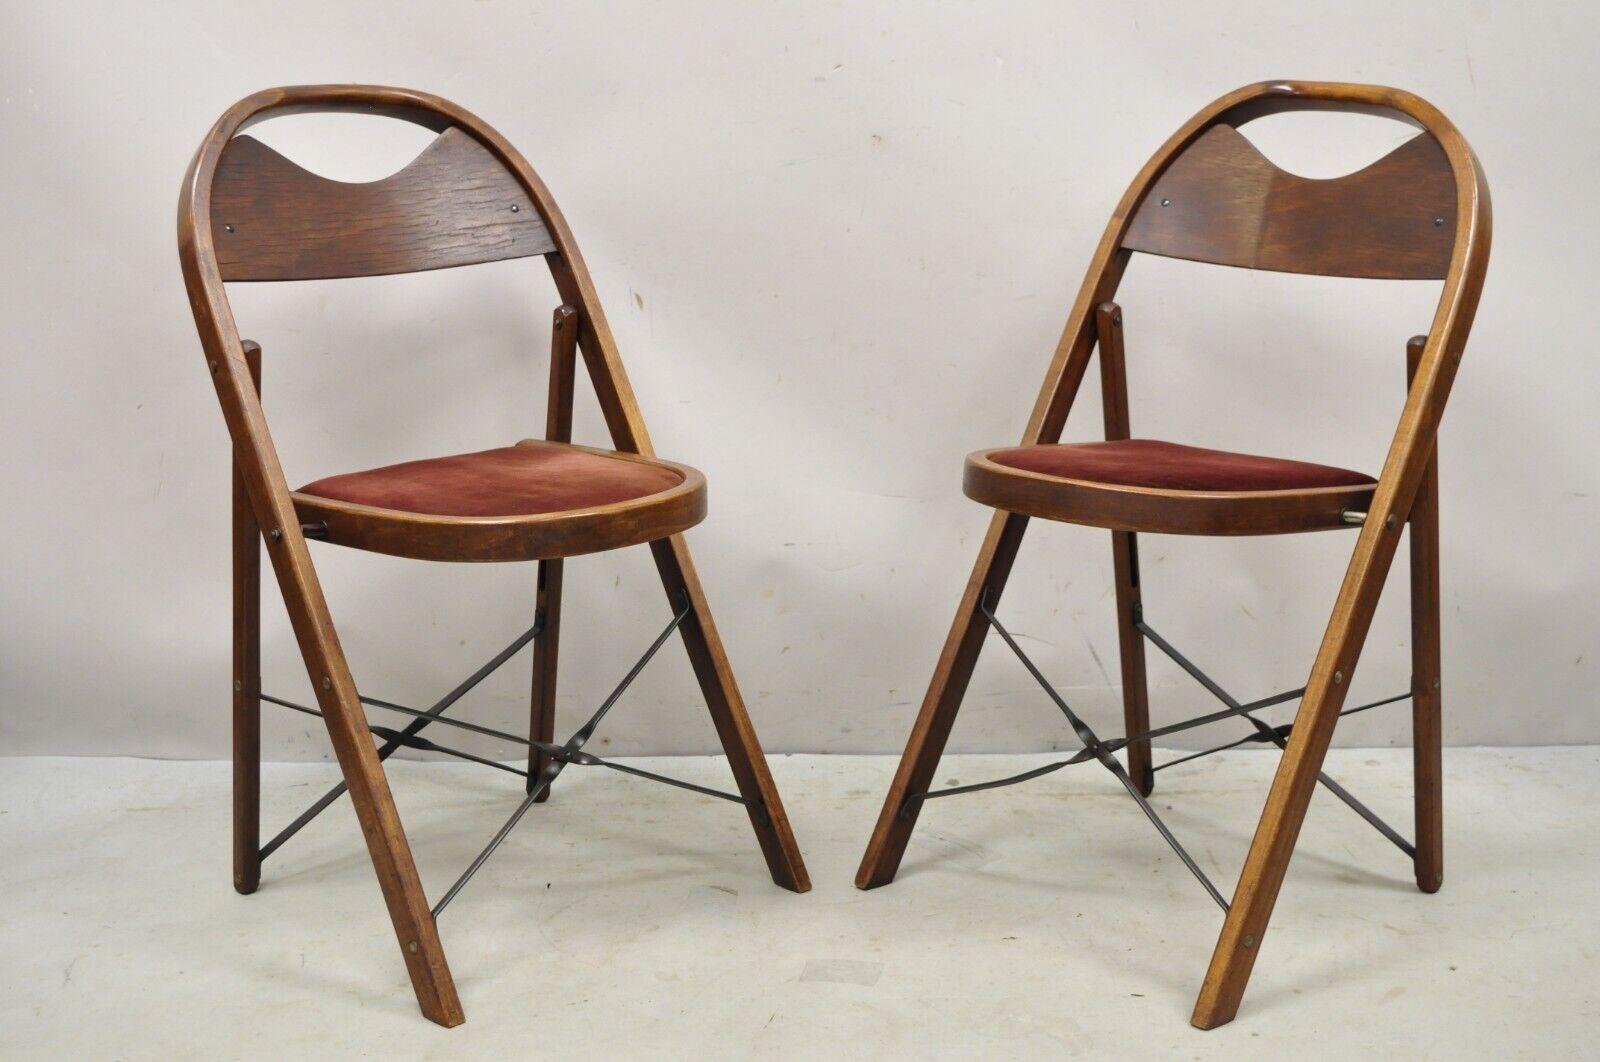 Vintage Art Deco Wooden Theatre Folding Chairs by General Sales Co Set of 6 (A). Item features upholstered seats, metal cross stretcher, bentwood frames, original label, very nice vintage set, (2) sets of 6 currently available, price is per set.